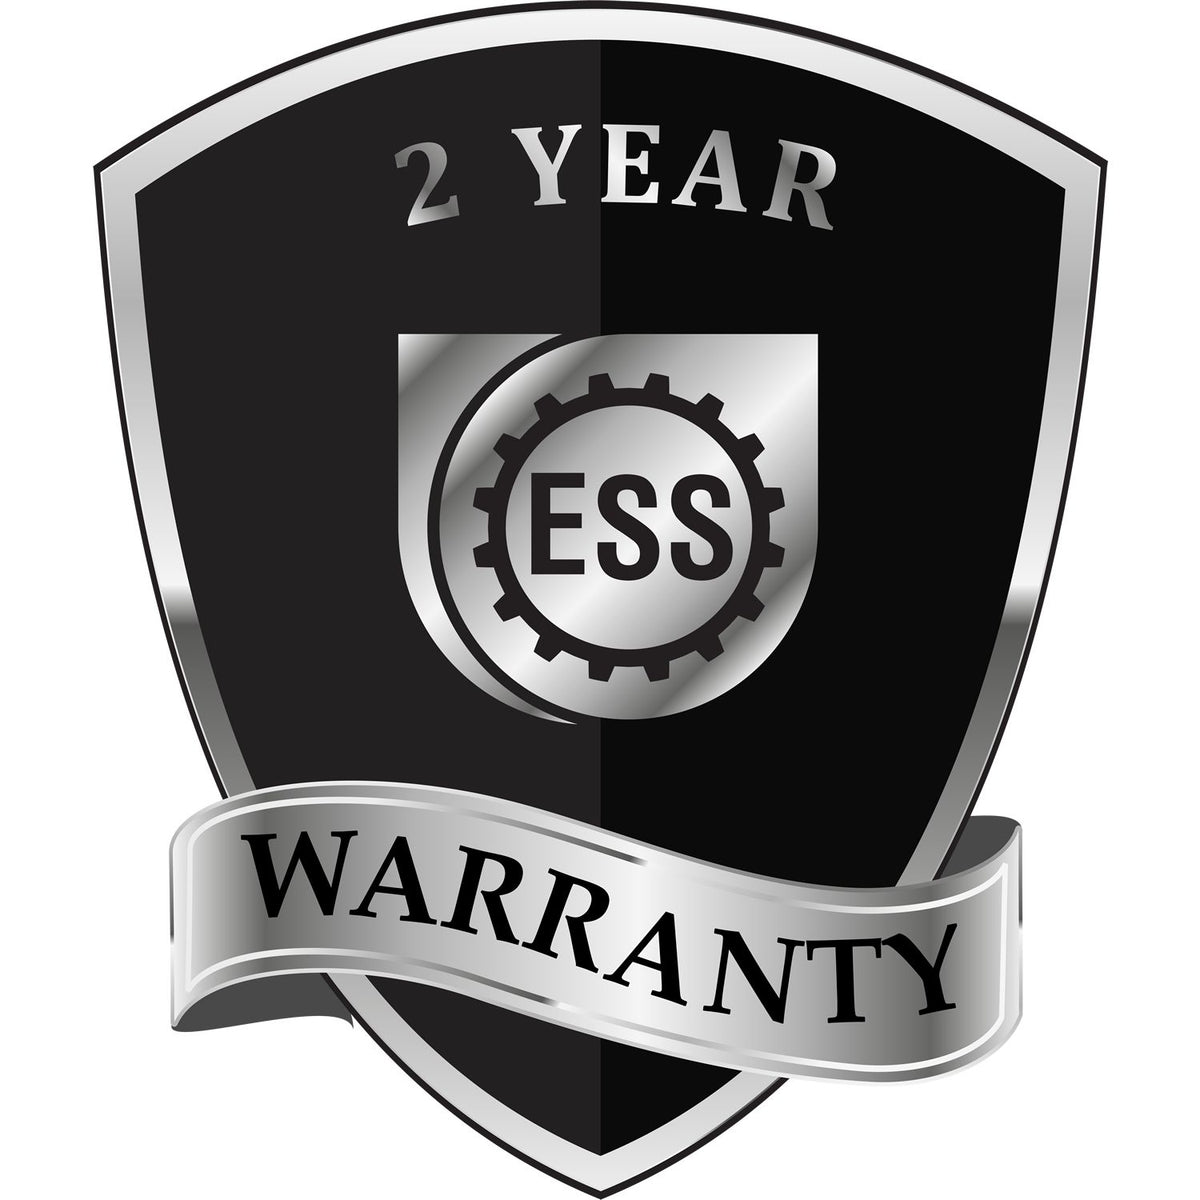 A badge or emblem showing a warranty icon for the Long Reach Delaware Land Surveyor Seal